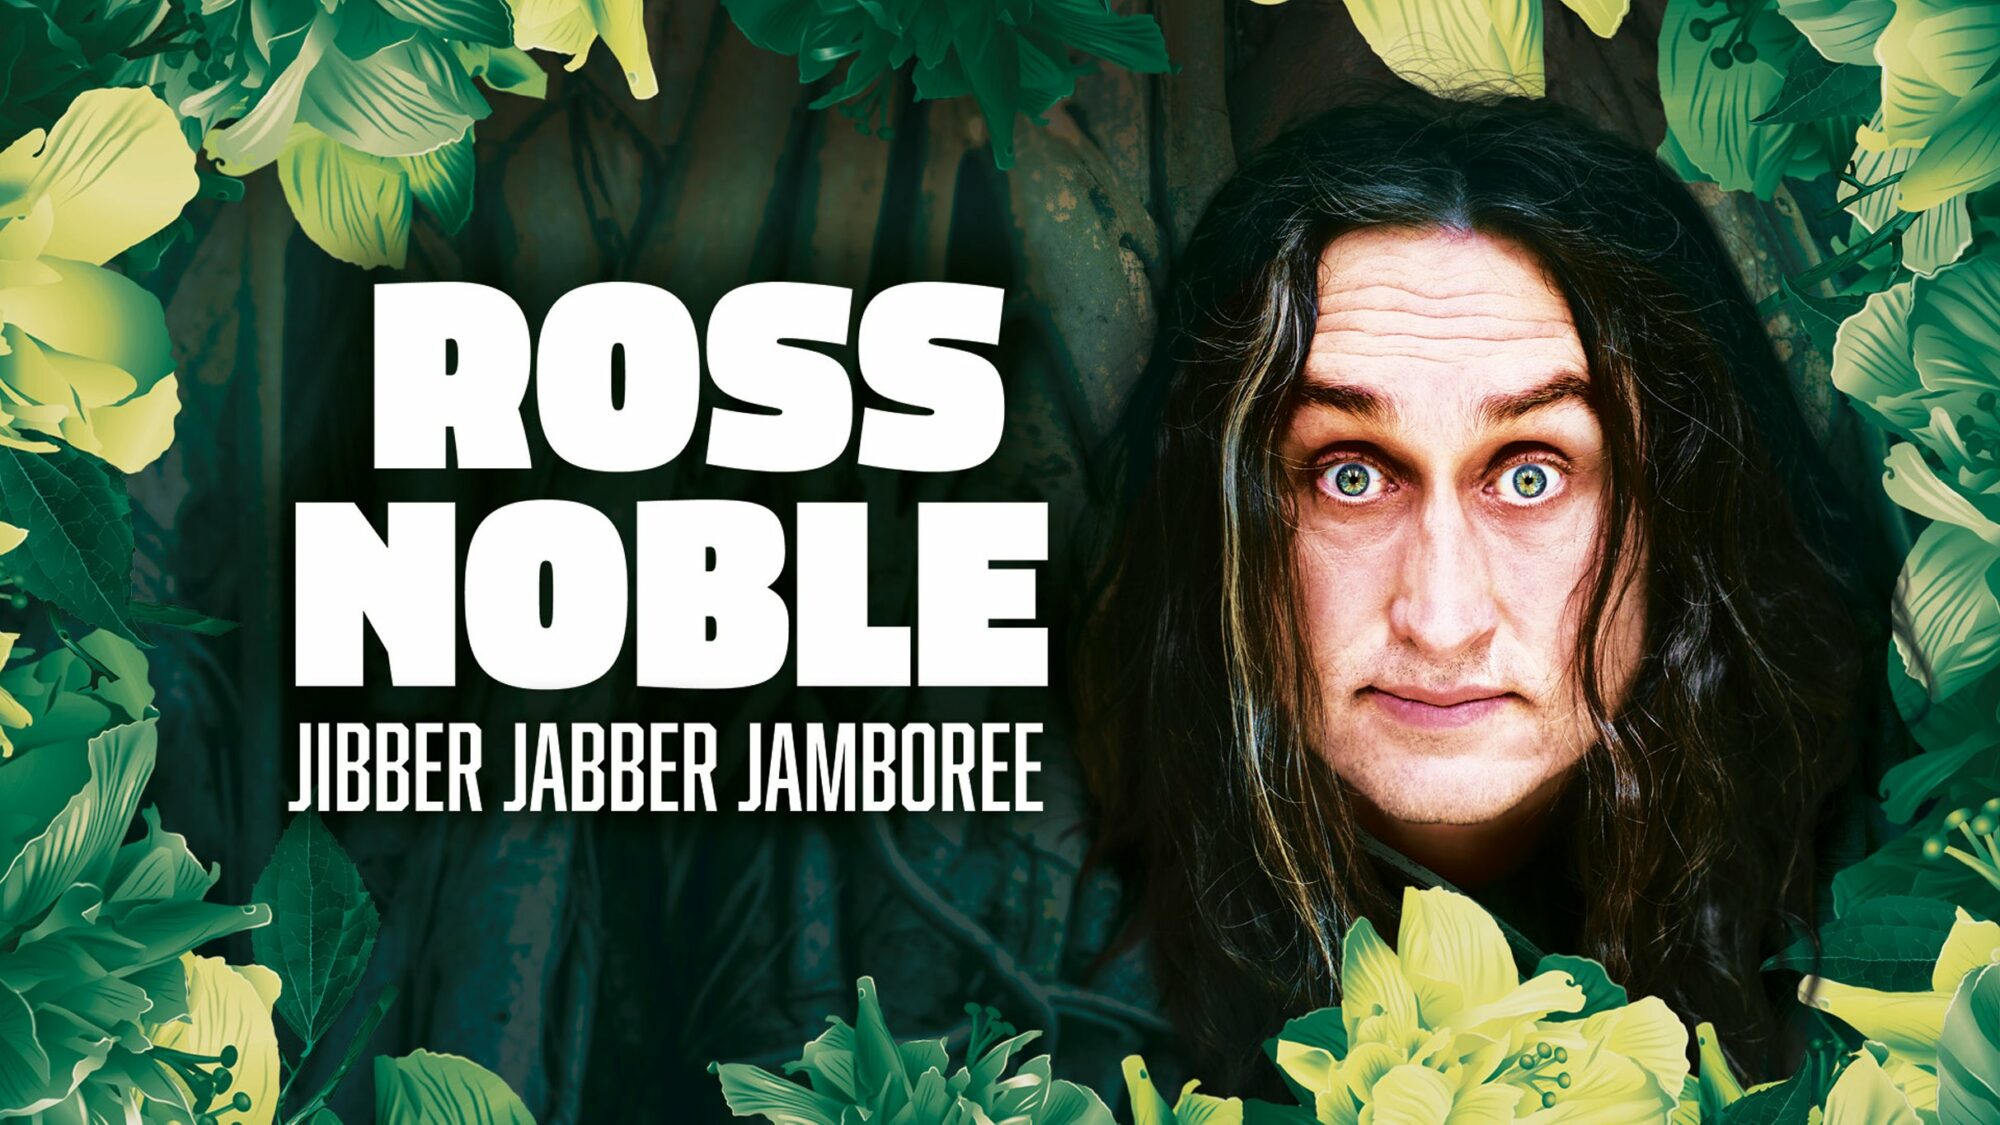 Image name Ross Noble Jibber Jabber Jamboree at The Royal Hall Harrogate the 2 image from the post Ross Noble: JIBBER JABBER JAMBOREE at Cast Doncaster, Doncaster in Yorkshire.com.